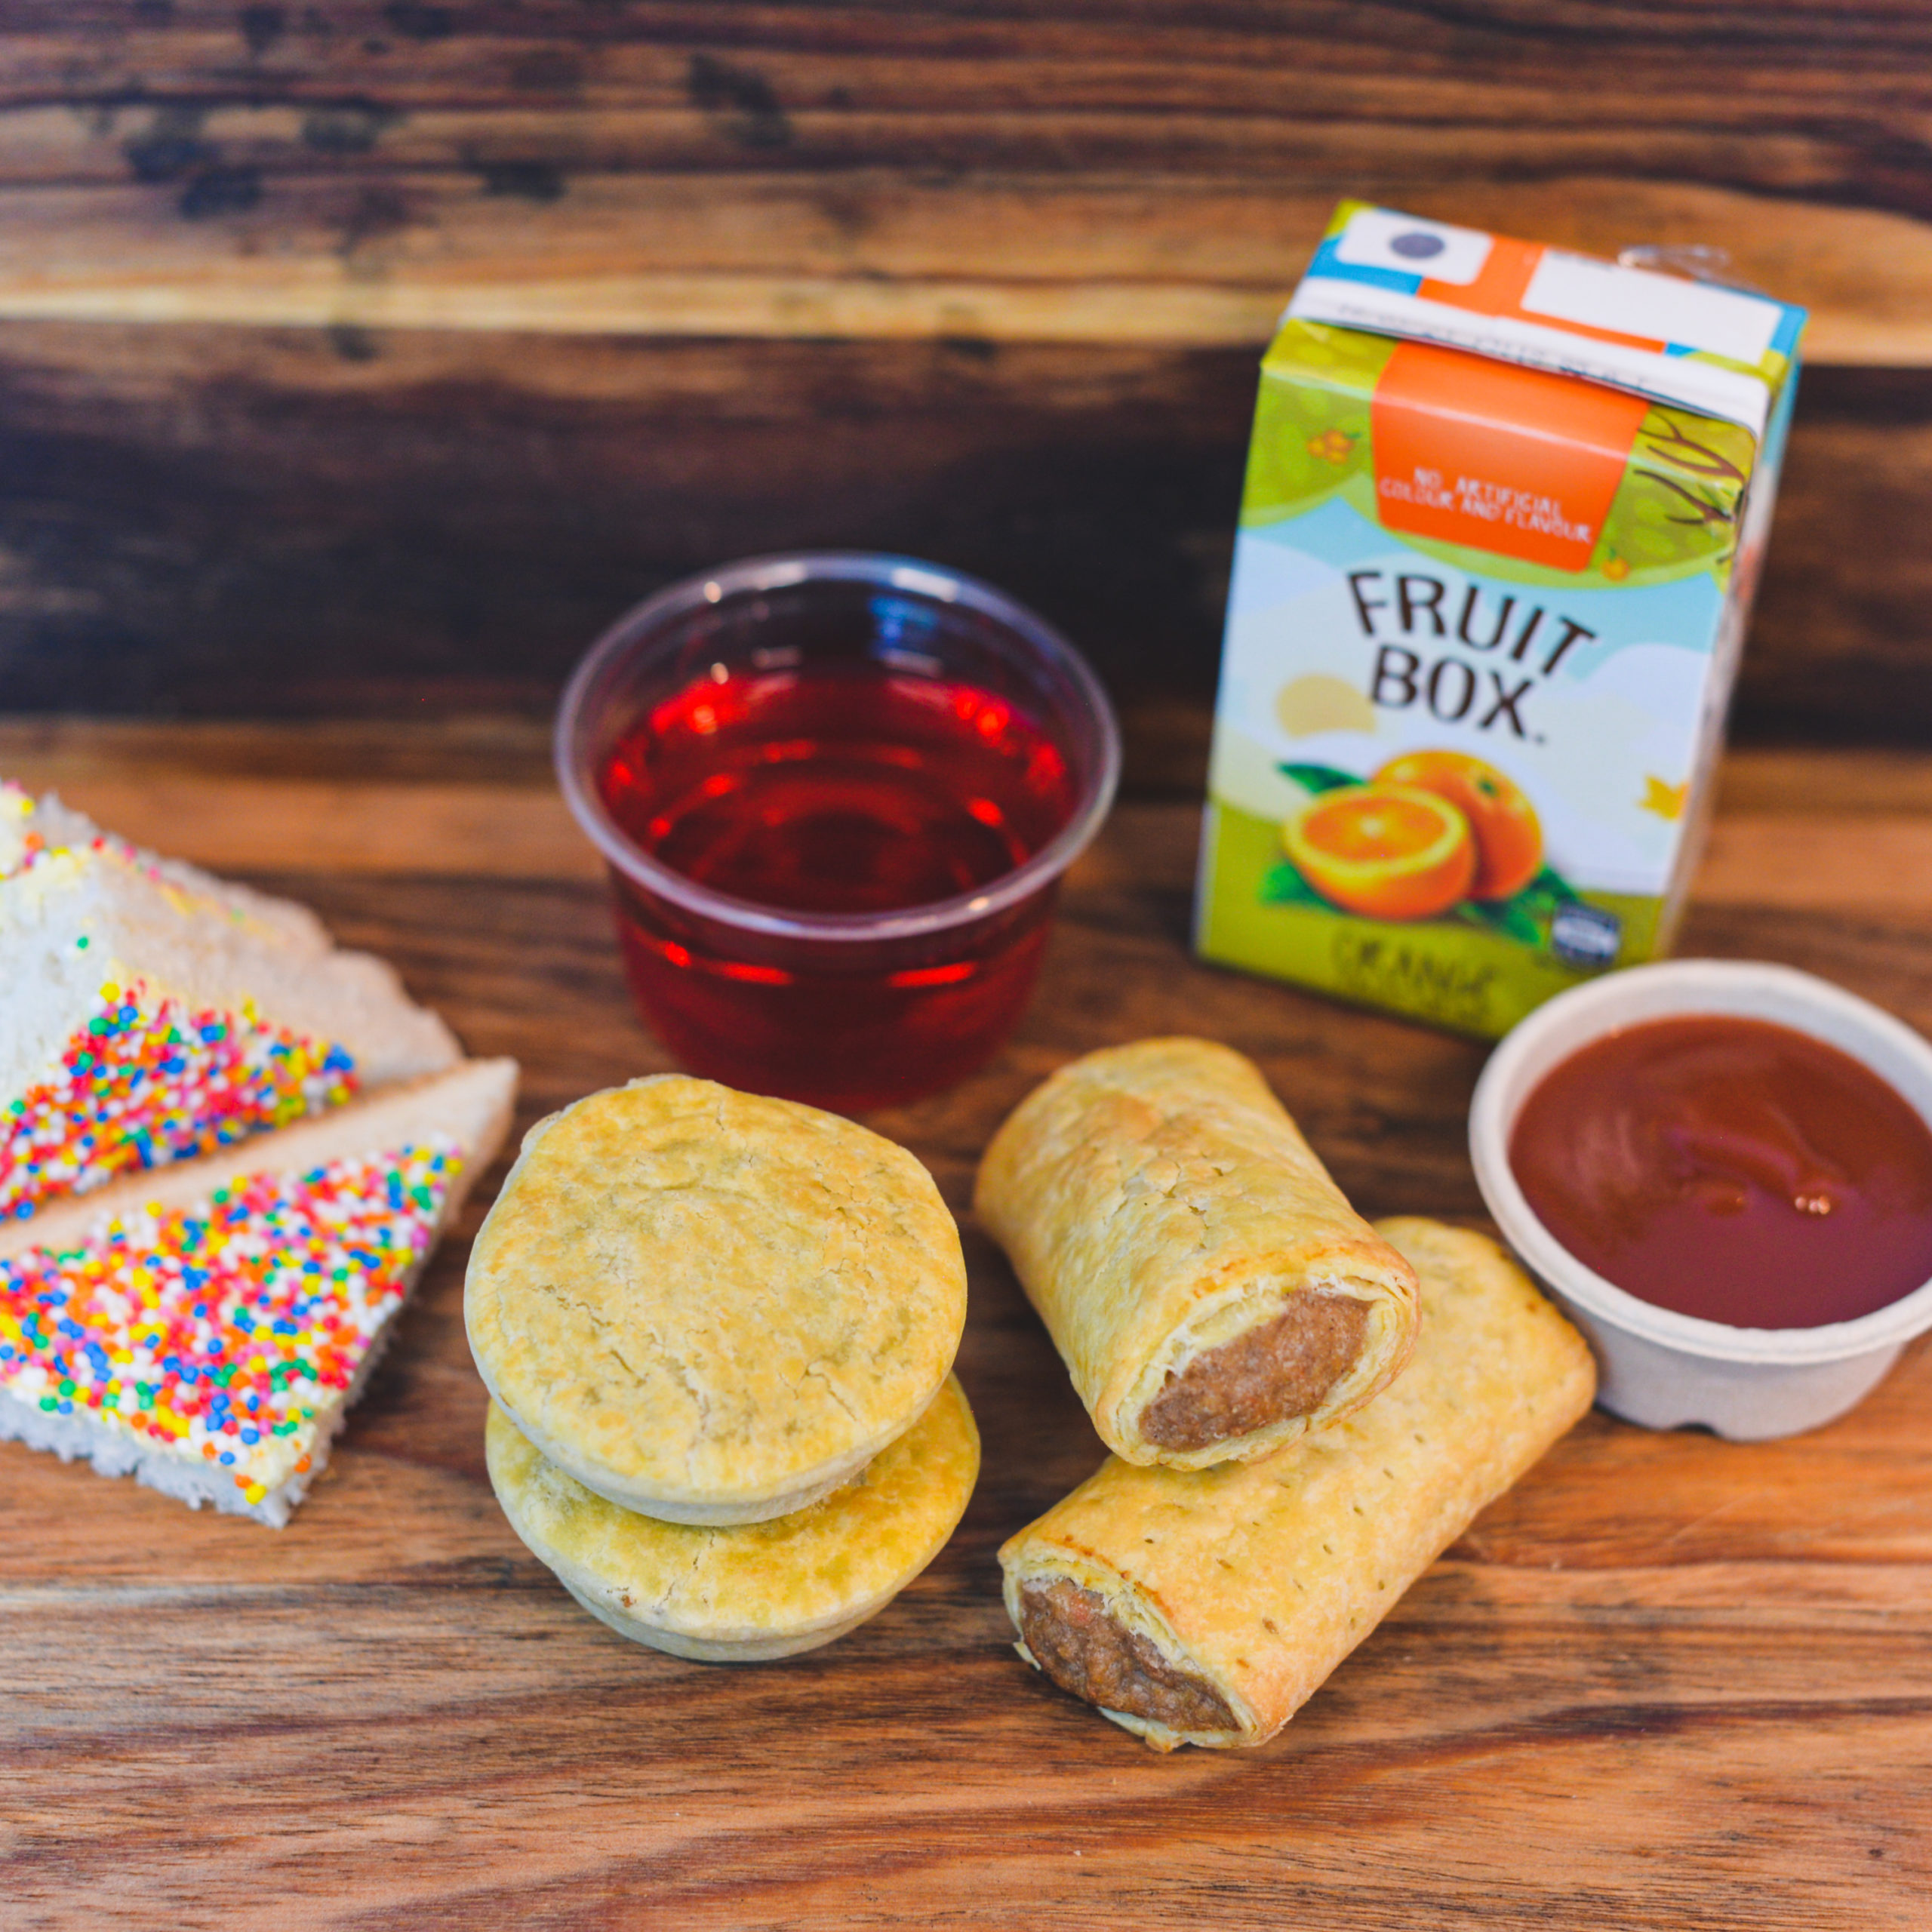 Party Pies, Sausage rolls, sauce, Fairy Bread, Jelly and juice box ($38.00)